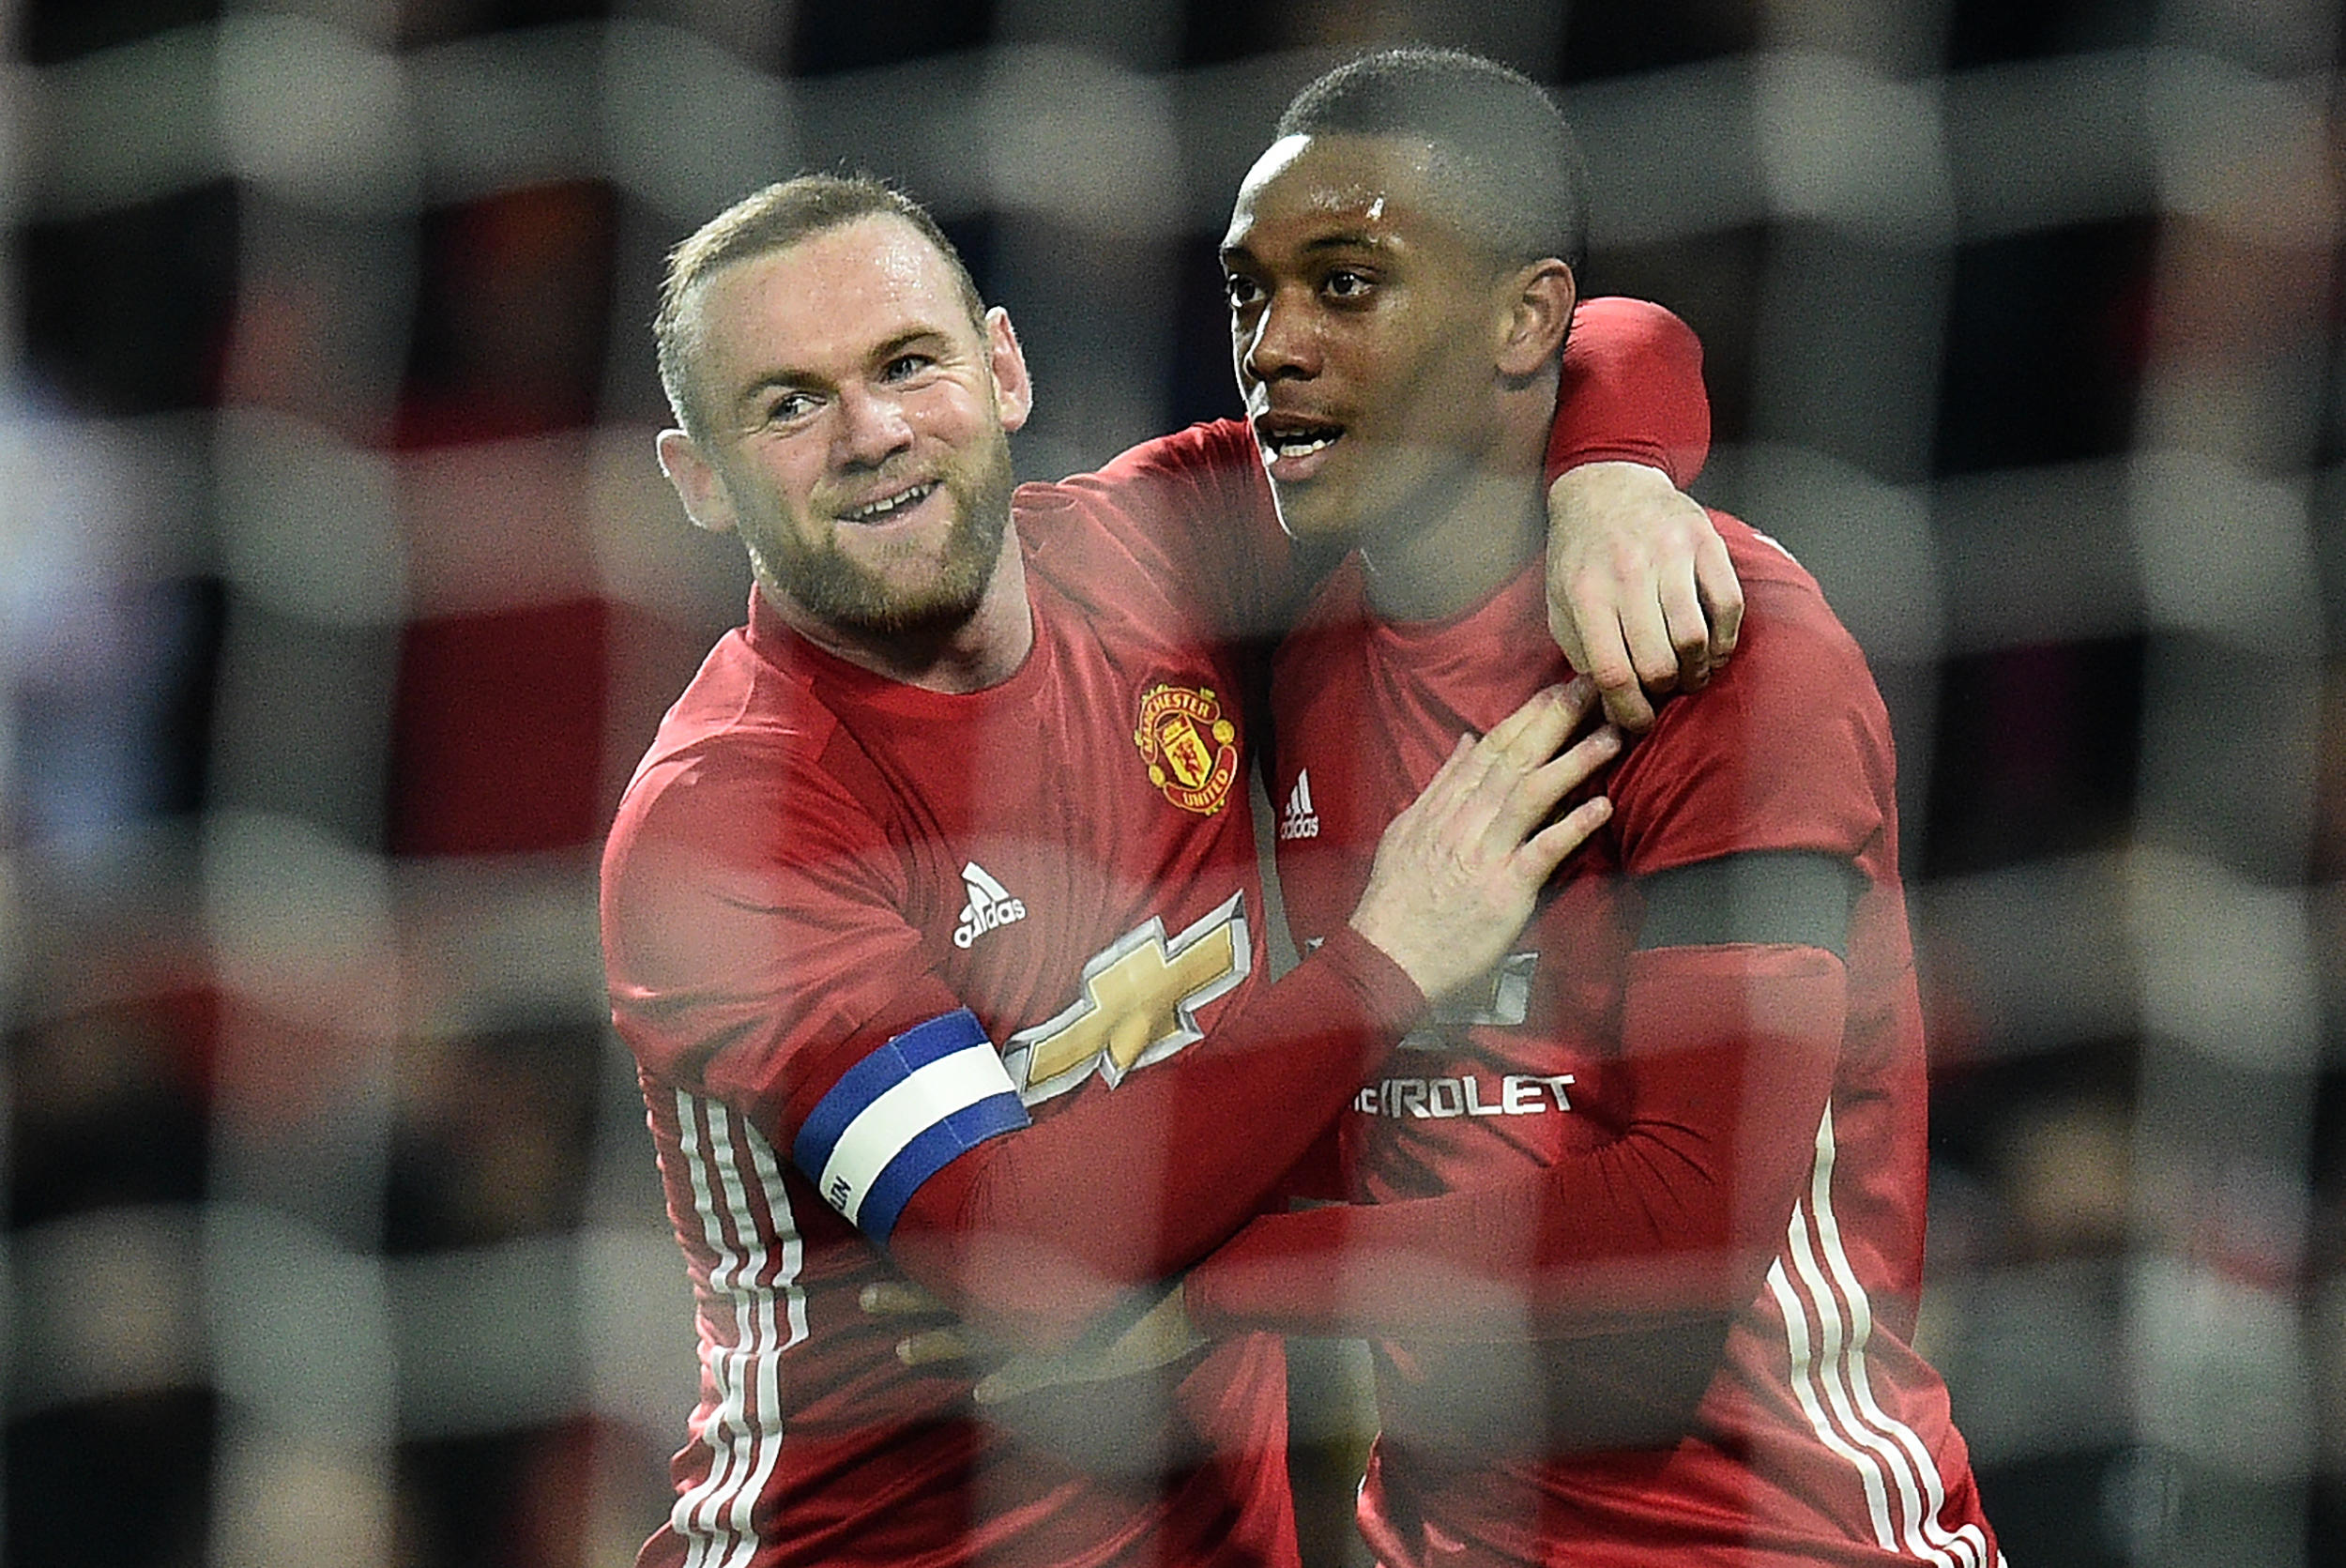 Manchester United's French striker Anthony Martial (R) celebrates scoring his team's third goal with Manchester United's English striker Wayne Rooney during the EFL (English Football League) Cup quarter-final football match between Manchester United and West Ham United at Old Trafford in Manchester, north west England, on November 30, 2016. / AFP / Oli SCARFF / RESTRICTED TO EDITORIAL USE. No use with unauthorized audio, video, data, fixture lists, club/league logos or 'live' services. Online in-match use limited to 75 images, no video emulation. No use in betting, games or single club/league/player publications. / (Photo credit should read OLI SCARFF/AFP/Getty Images)